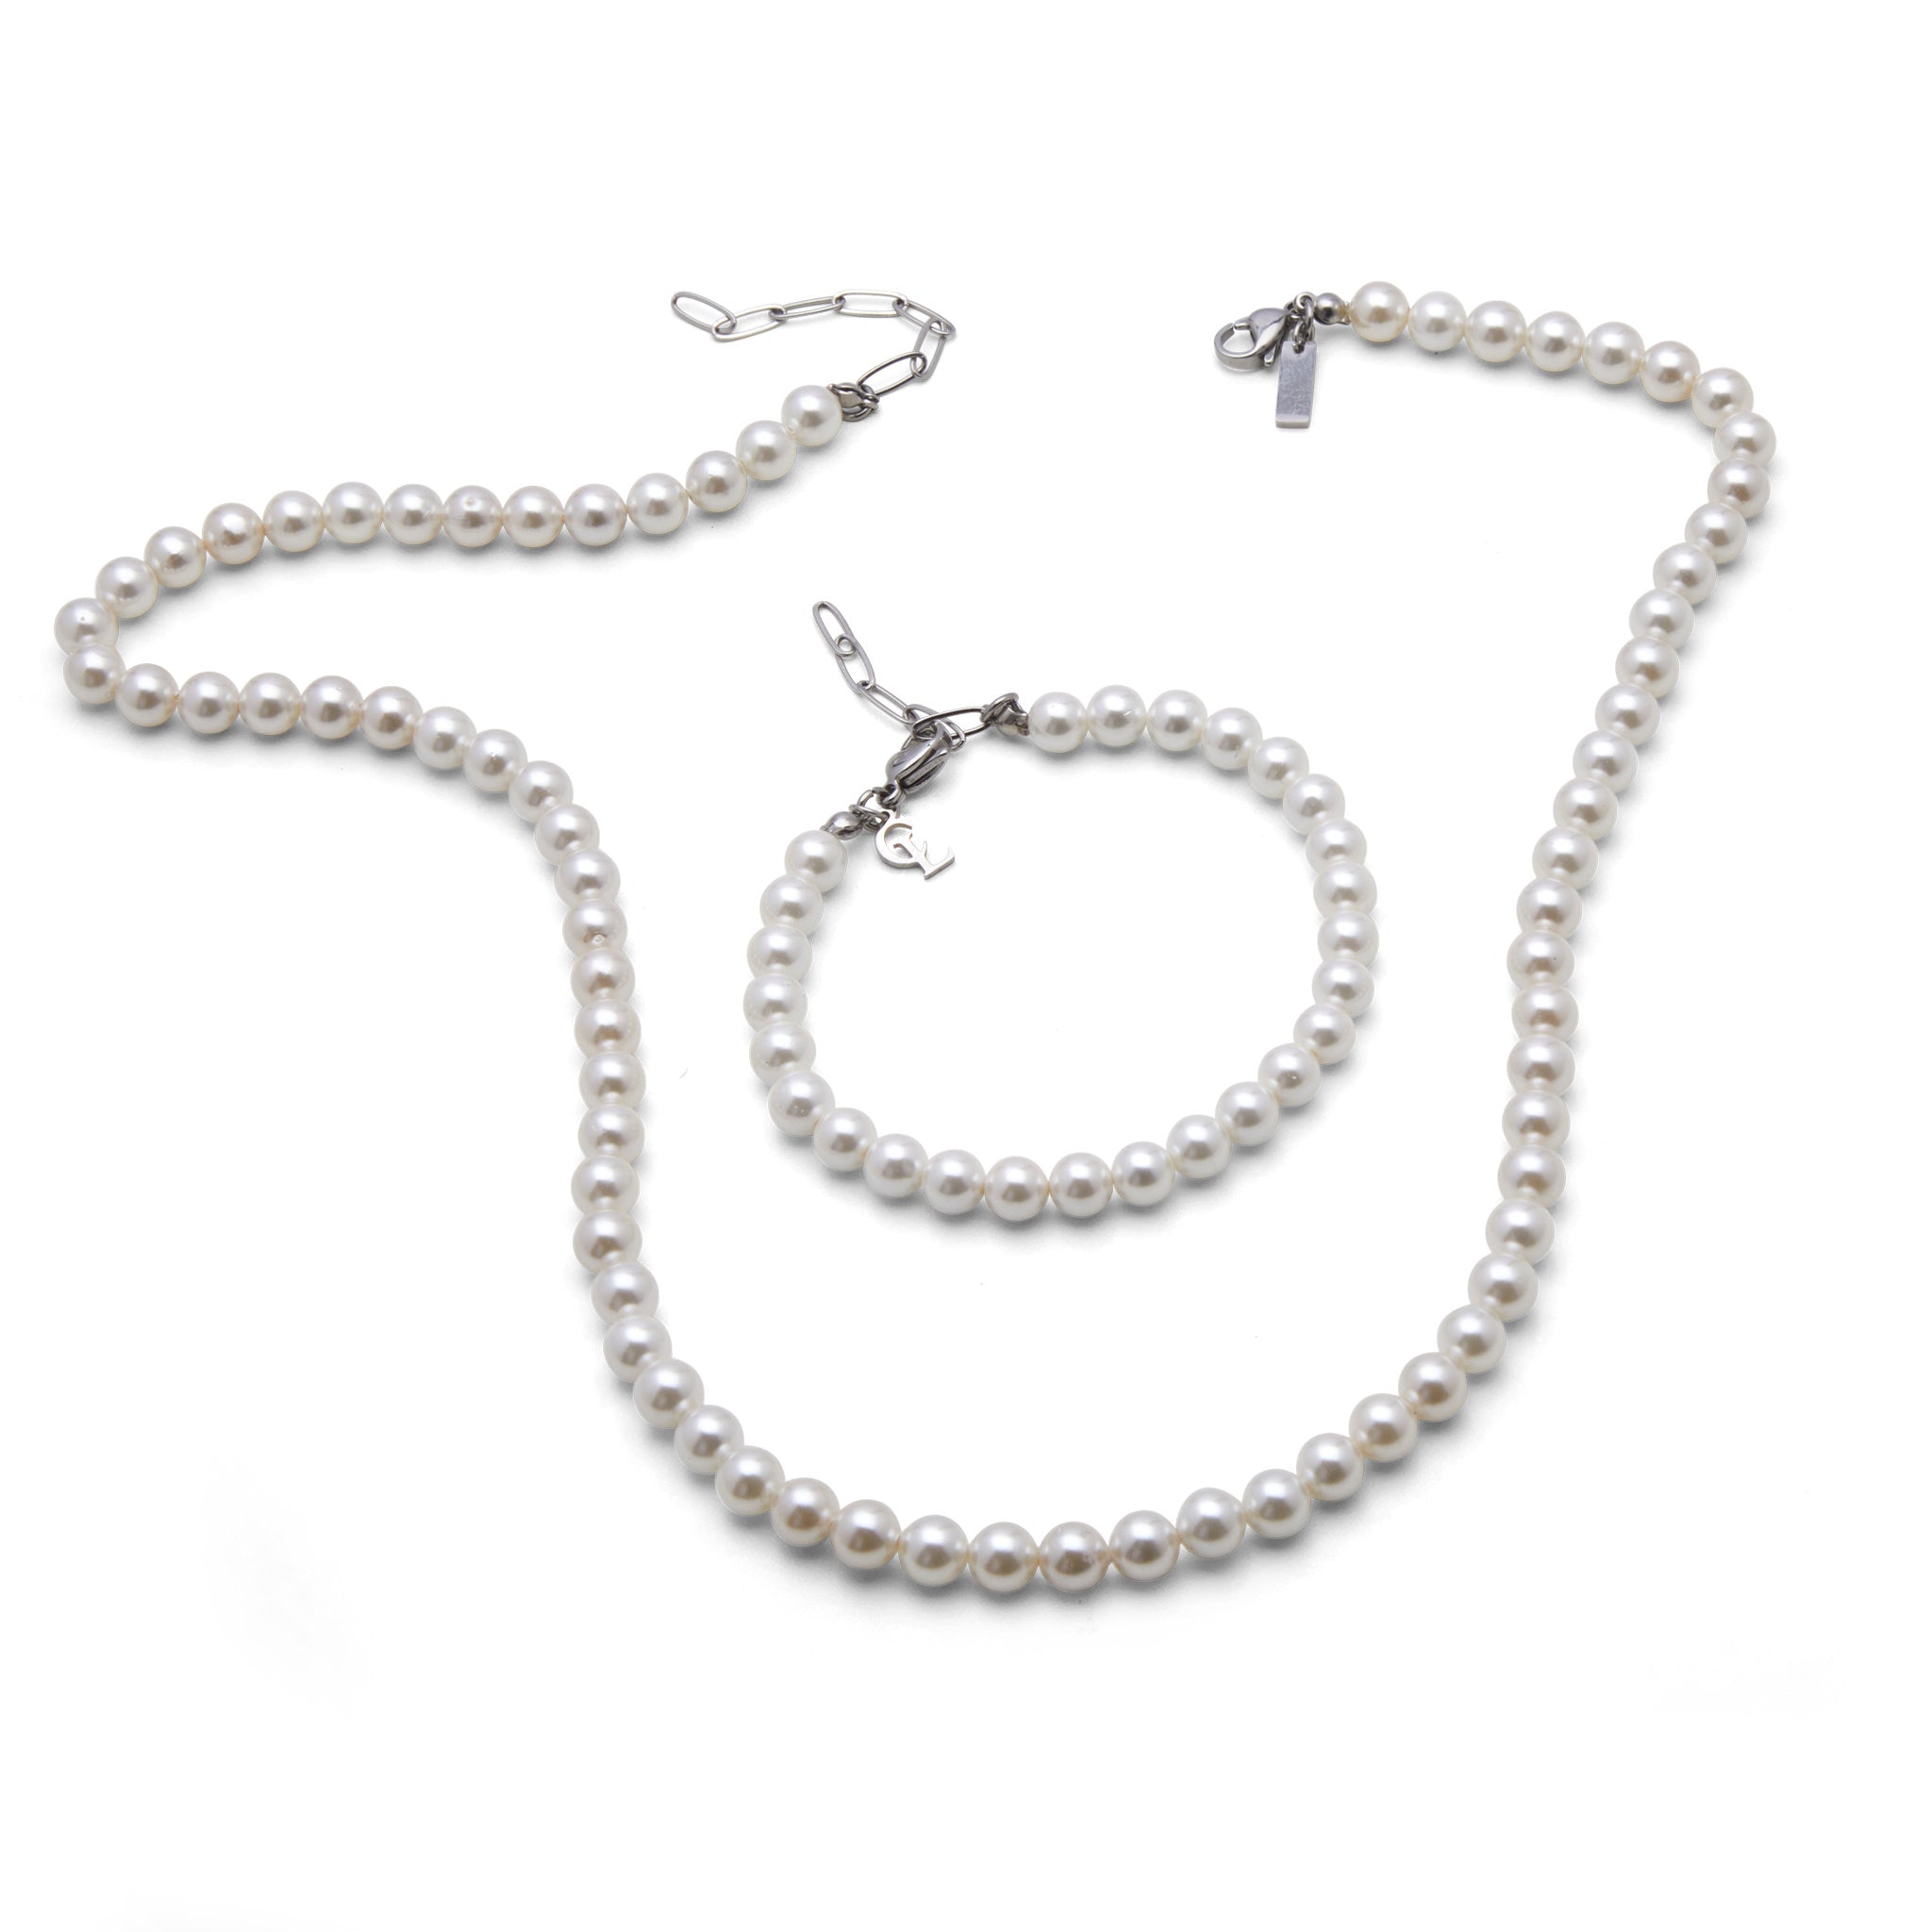 The Classic Pearl Set